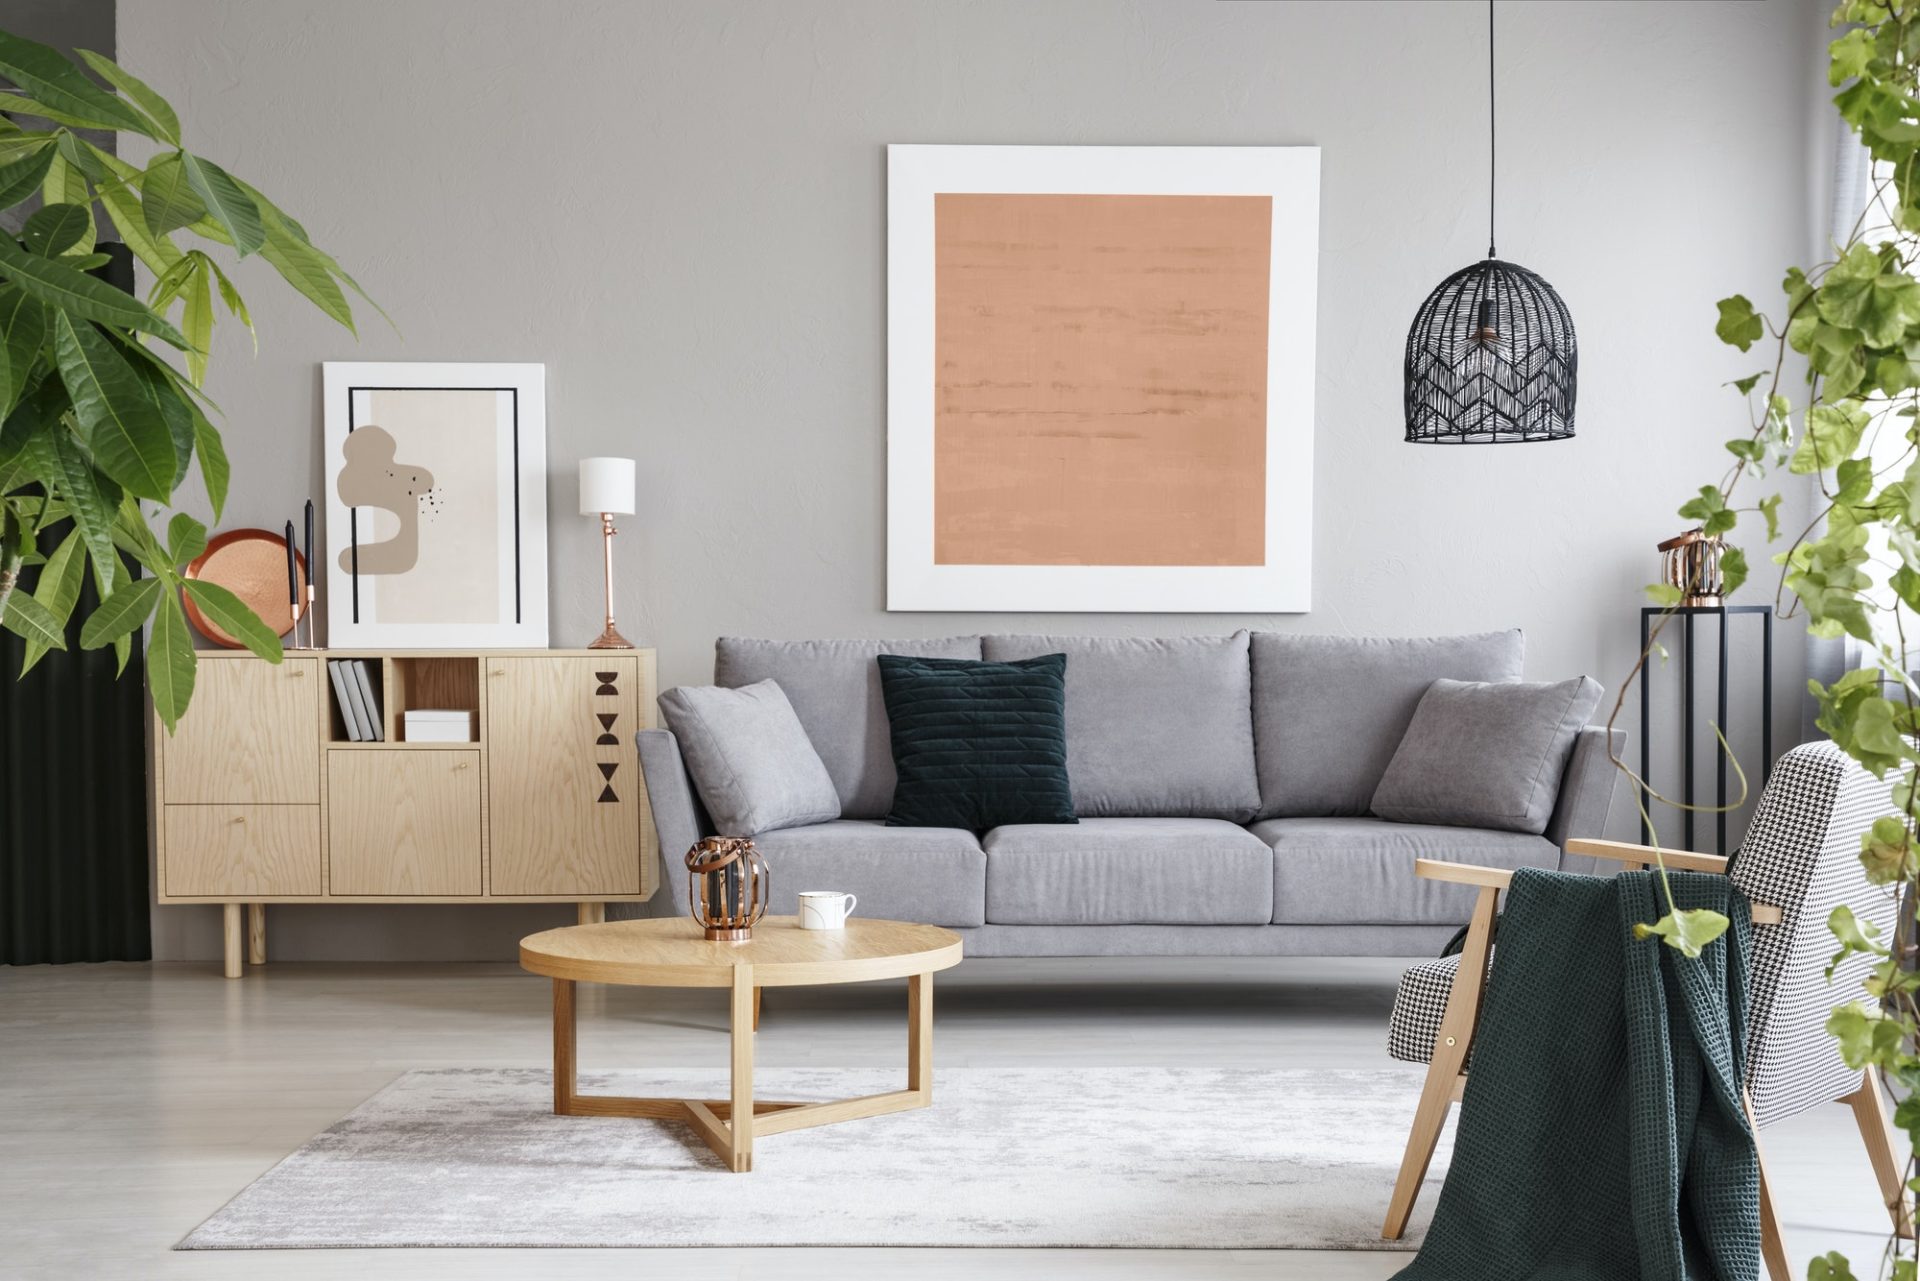 Pink poster above grey sofa in living room interior with wooden